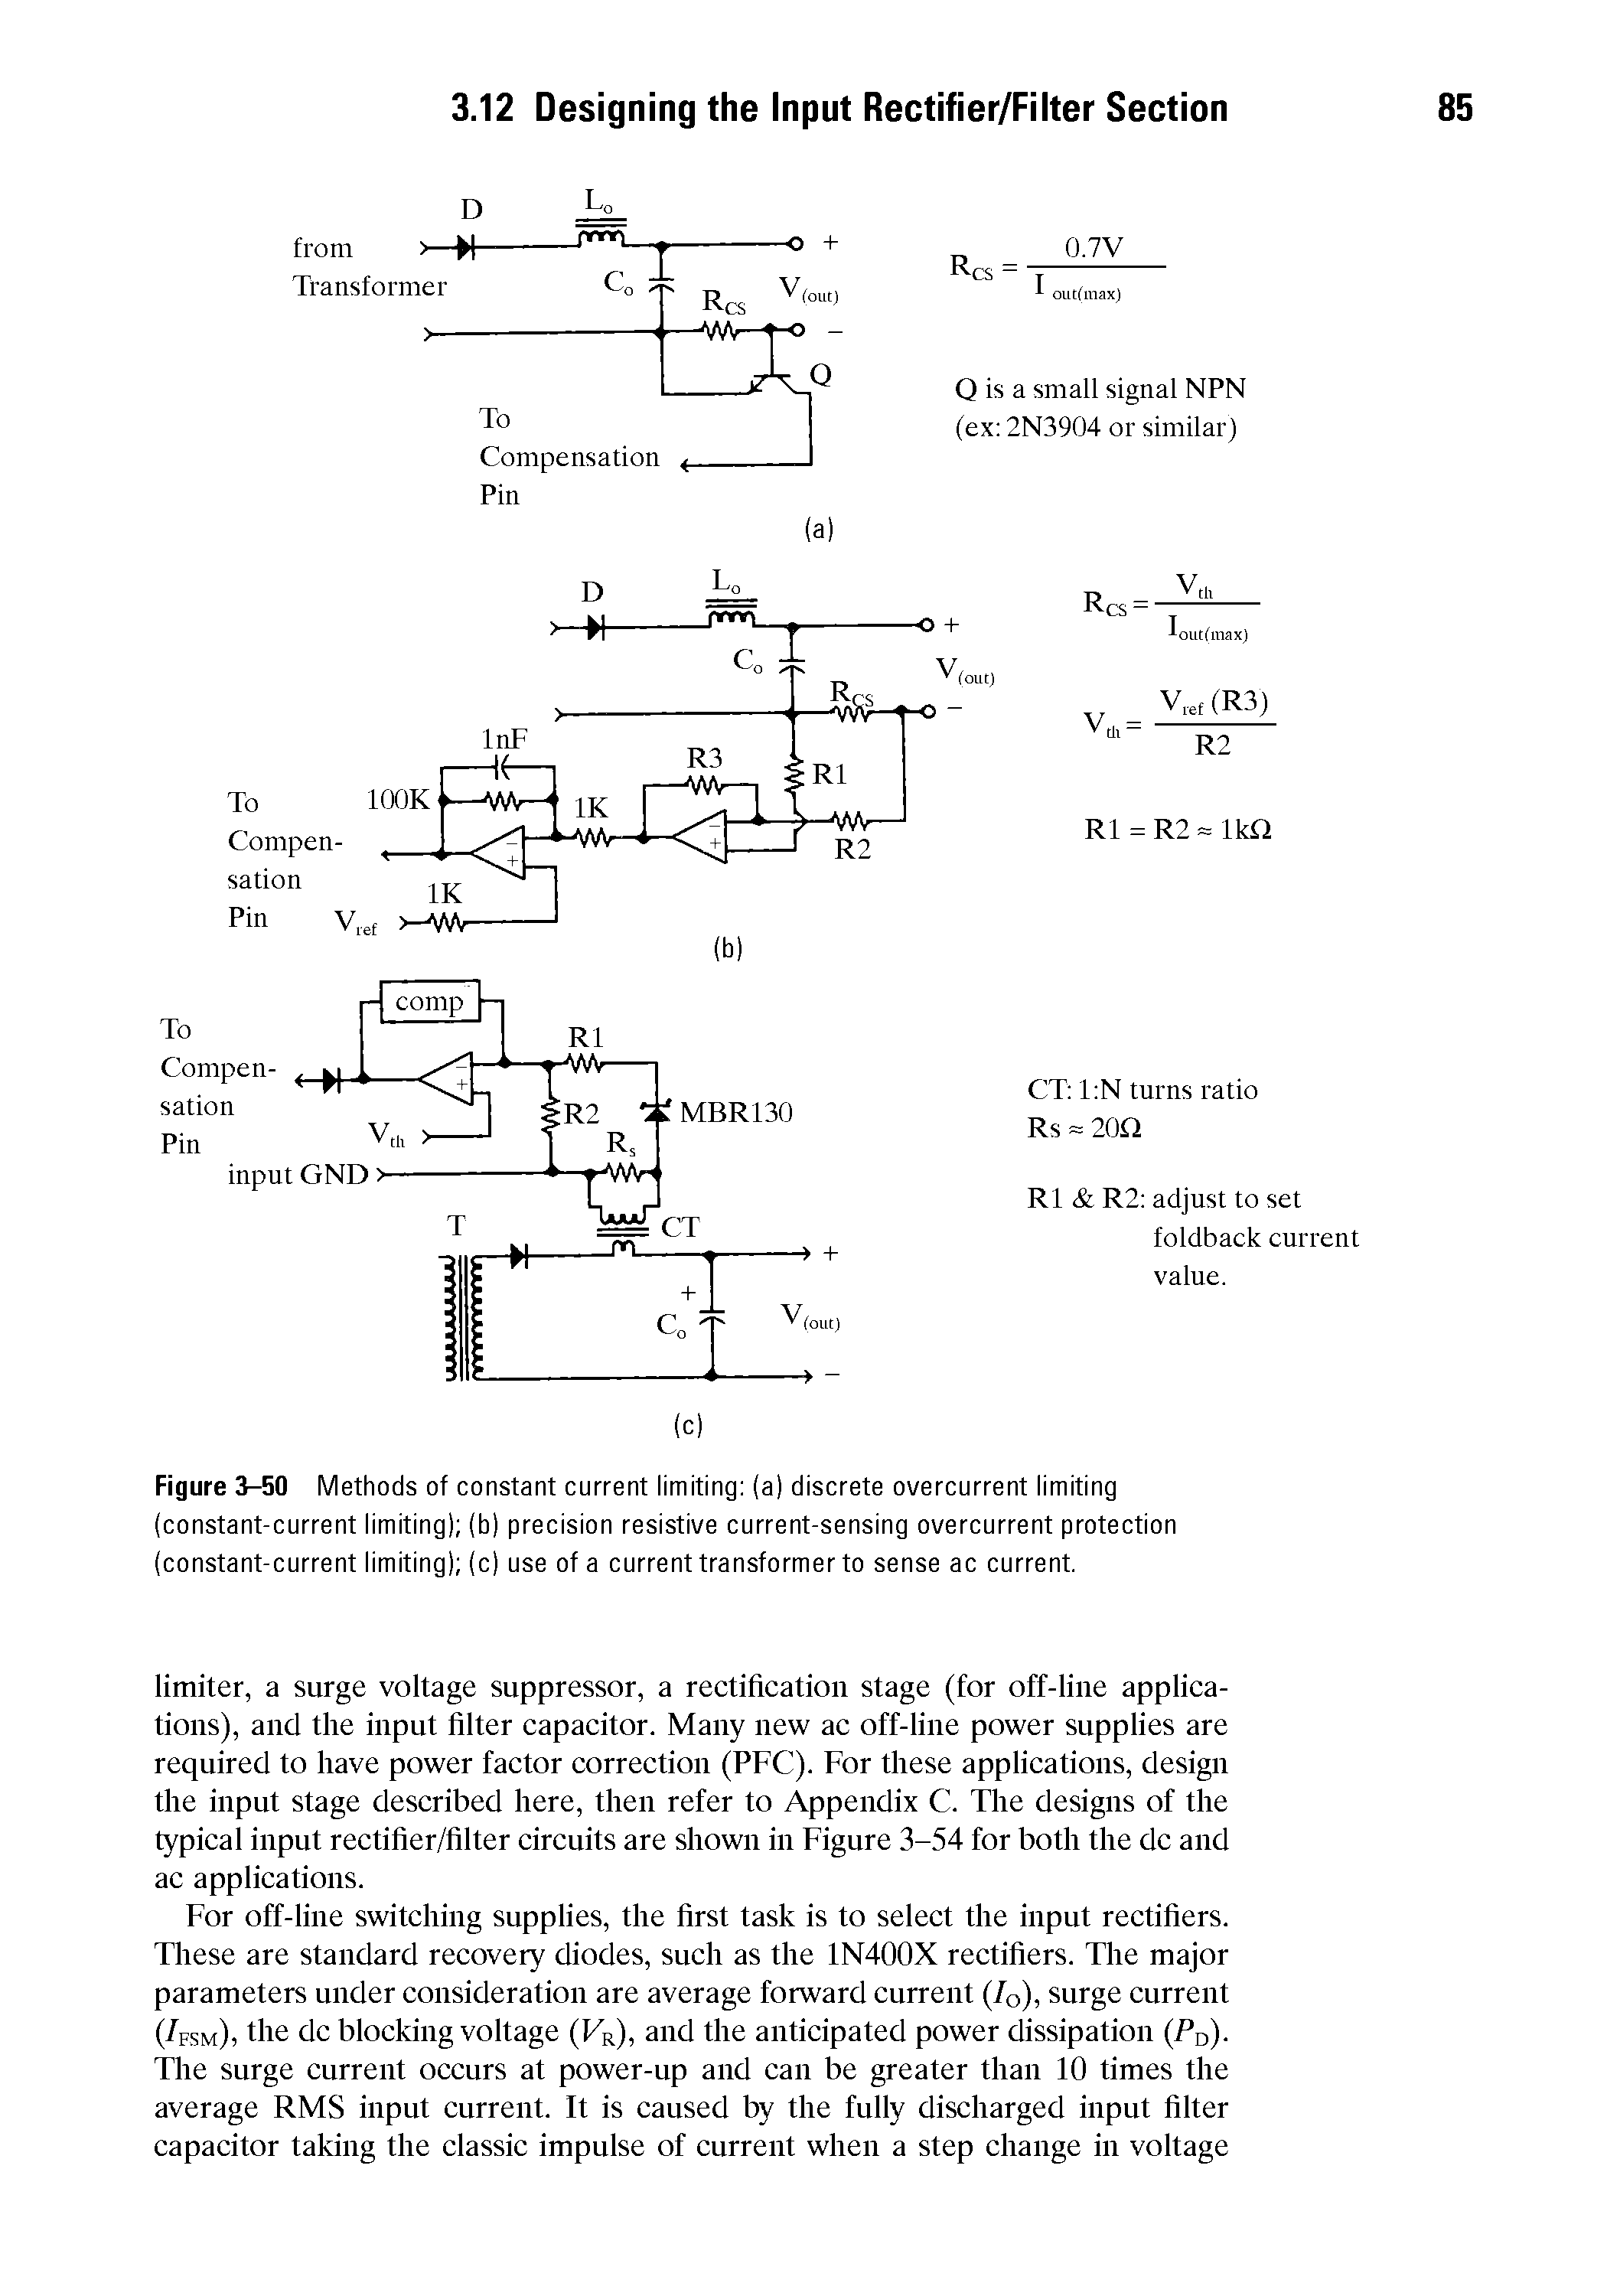 Figure 3-50 Methods of constant current limiting (a) discrete overcurrent limiting (constant-current limiting) (b) precision resistive current-sensing overcurrent protection (constant-current limiting) (c) use of a current transformer to sense ac current.